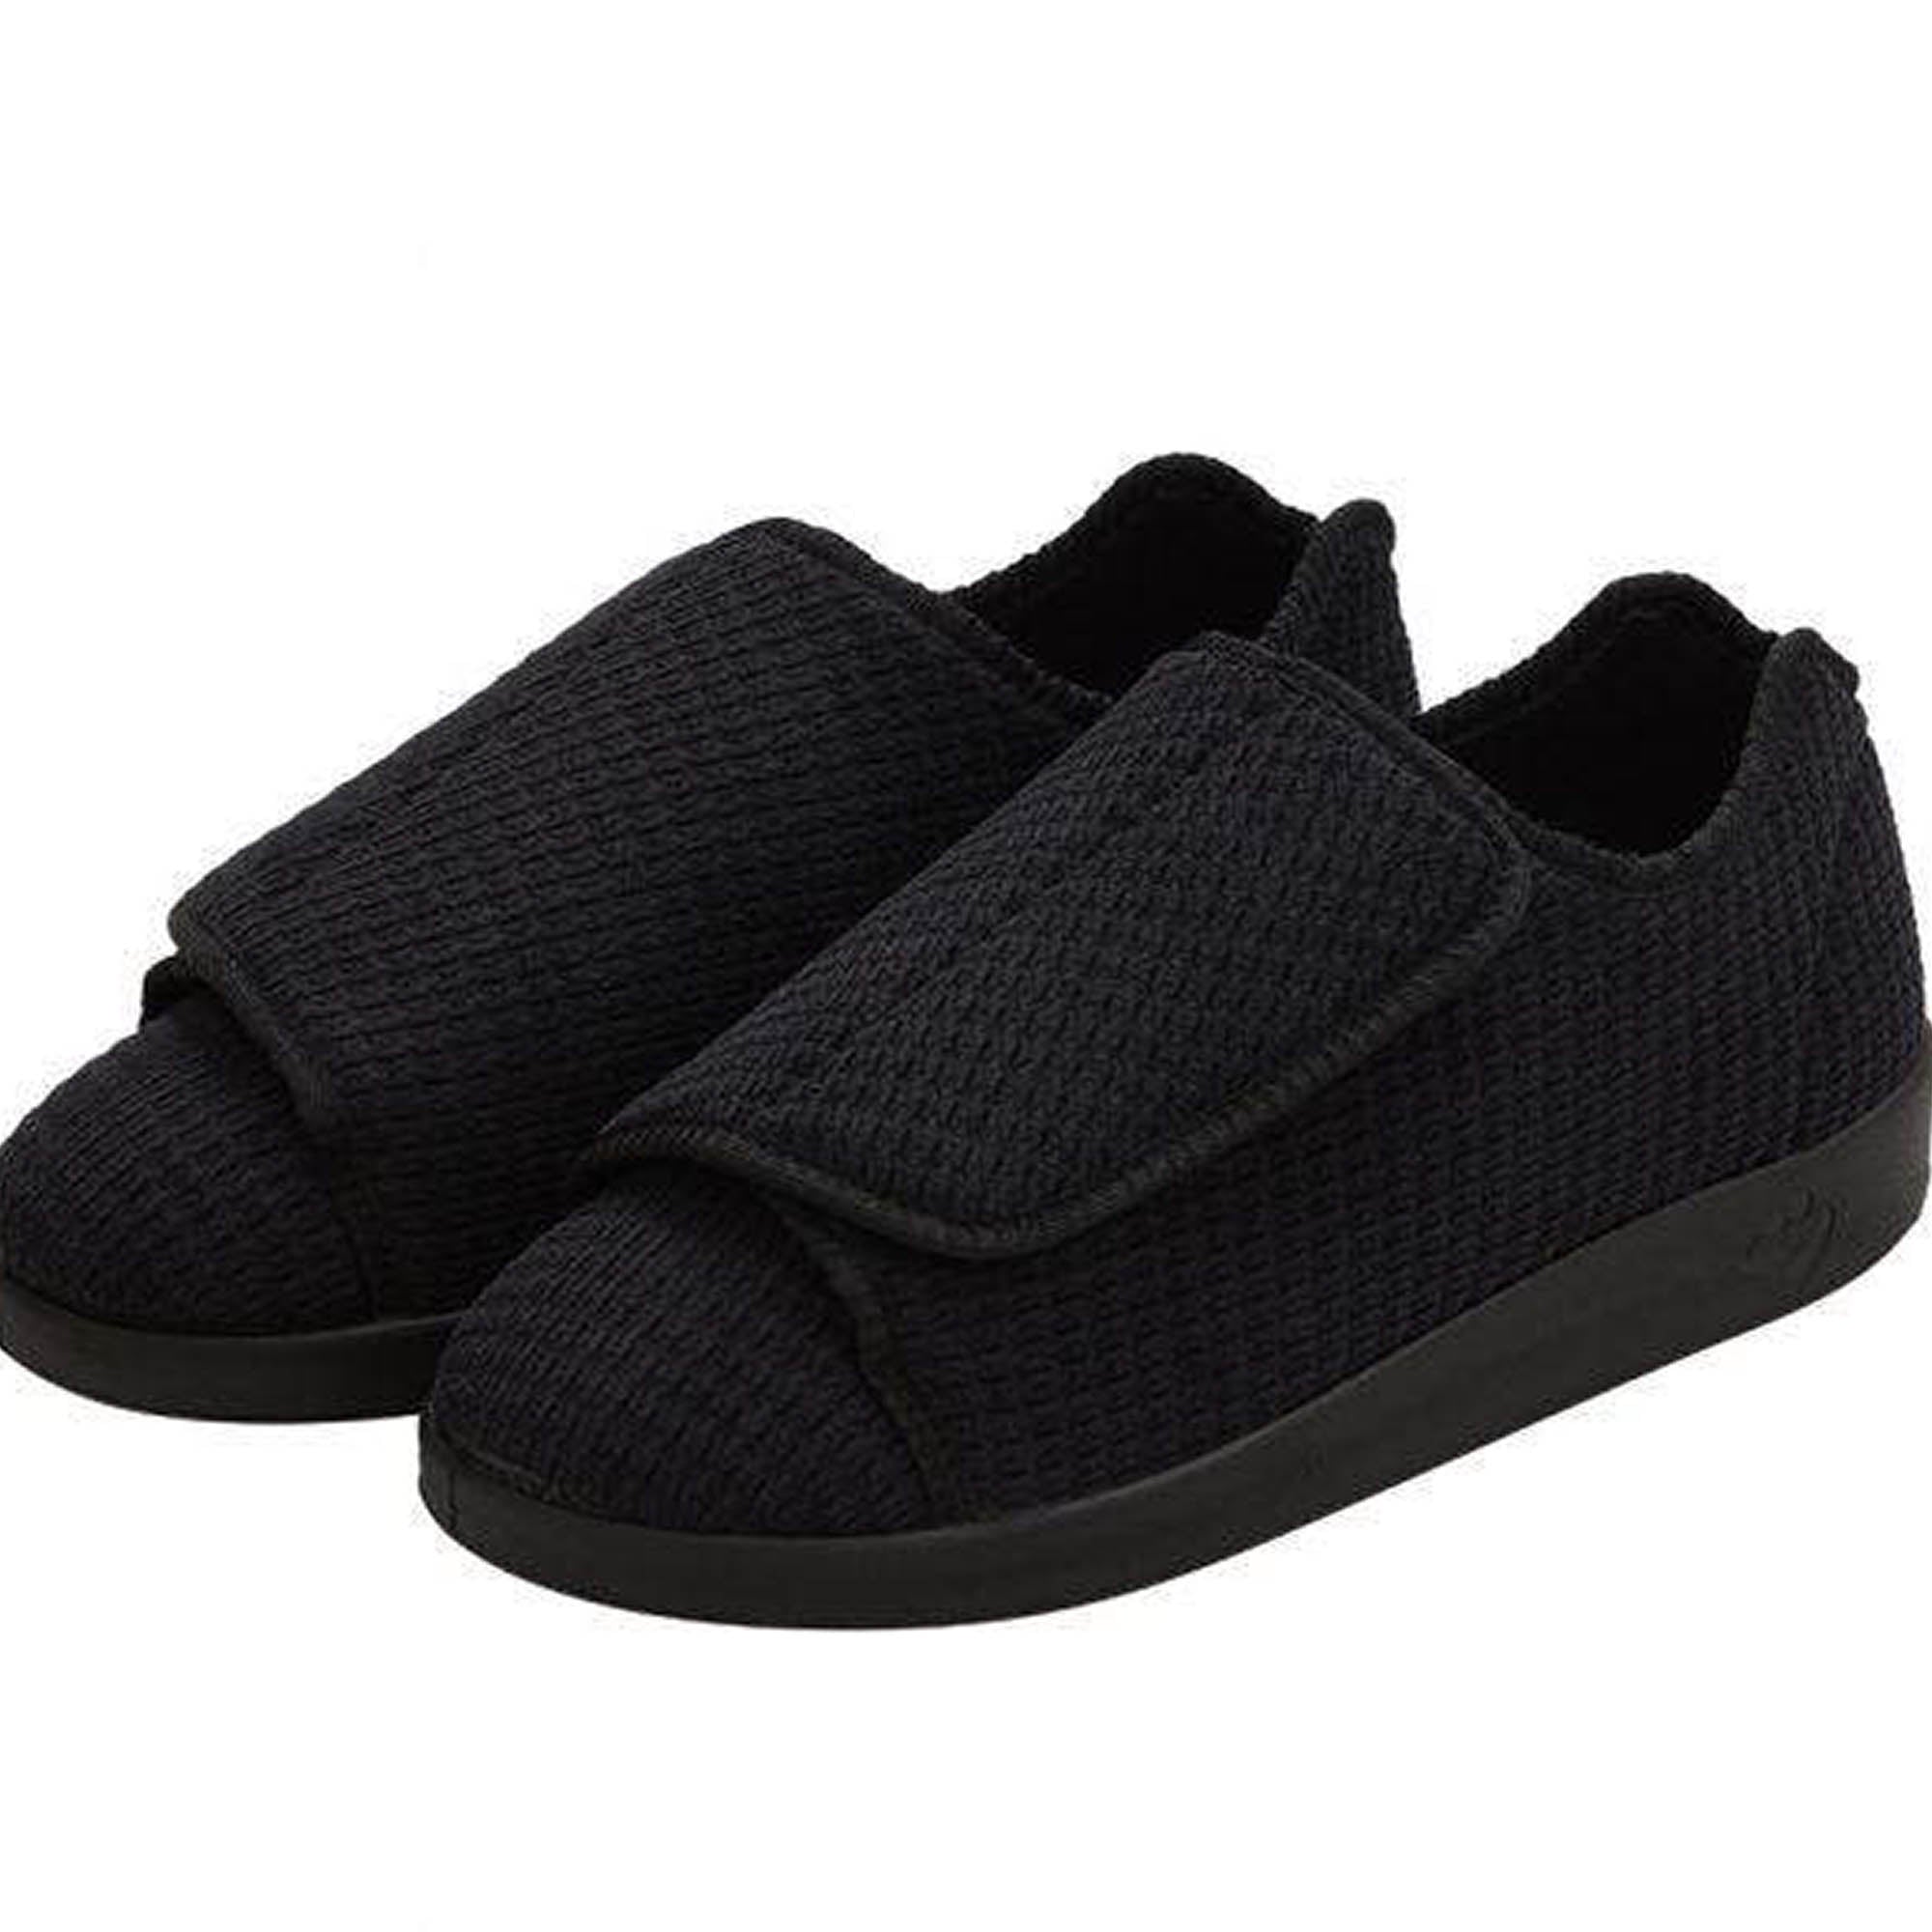 Silverts Men's Extra Extra Wide Slip-Resistant Slippers - Black - 7